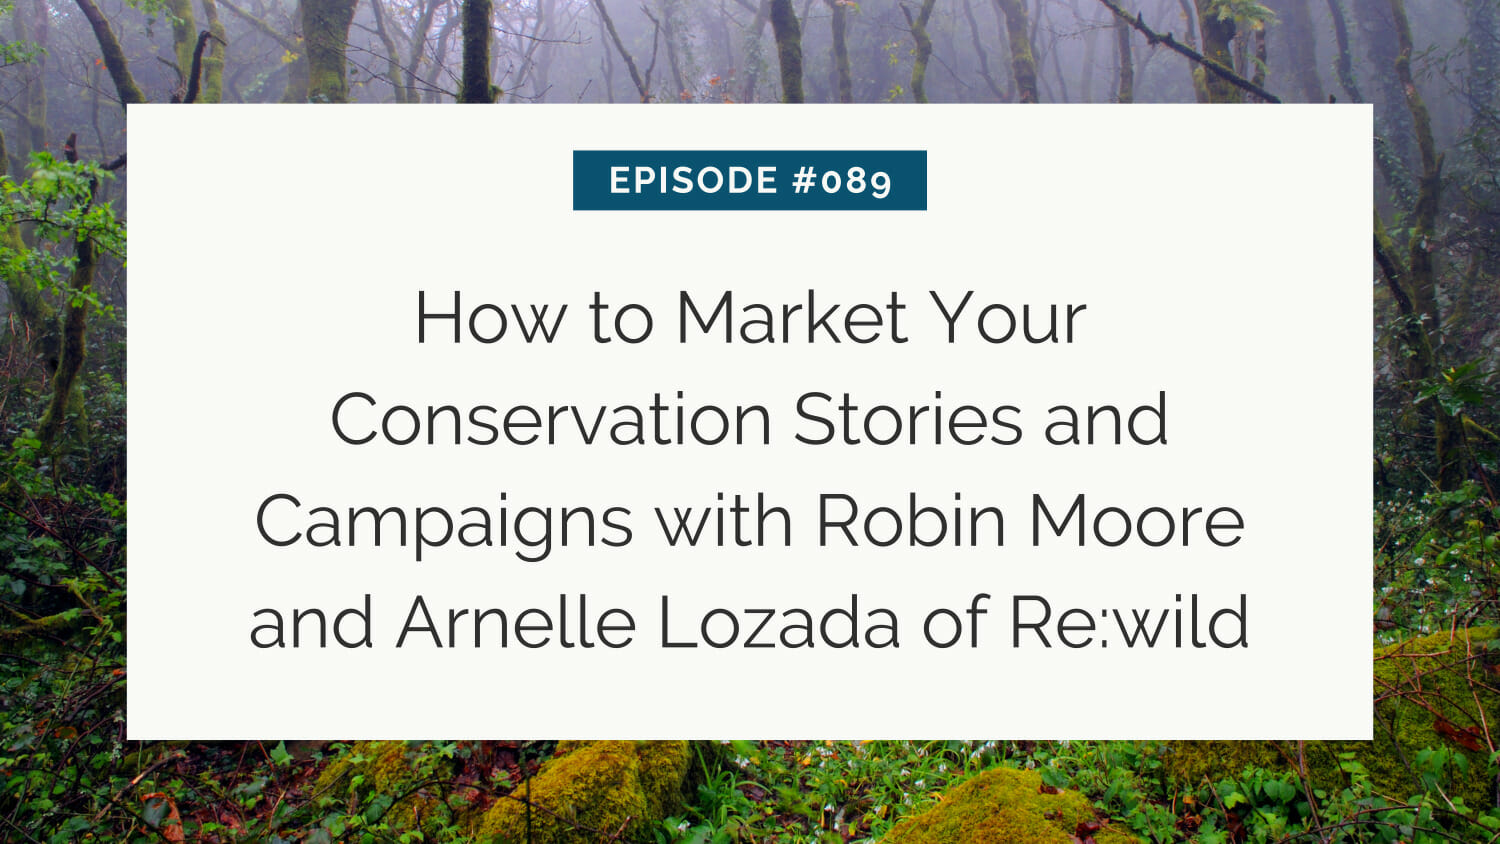 Podcast episode promotional graphic featuring an episode on marketing conservation stories with guests robin moore and arnelle lozada, set against a misty forest backdrop.